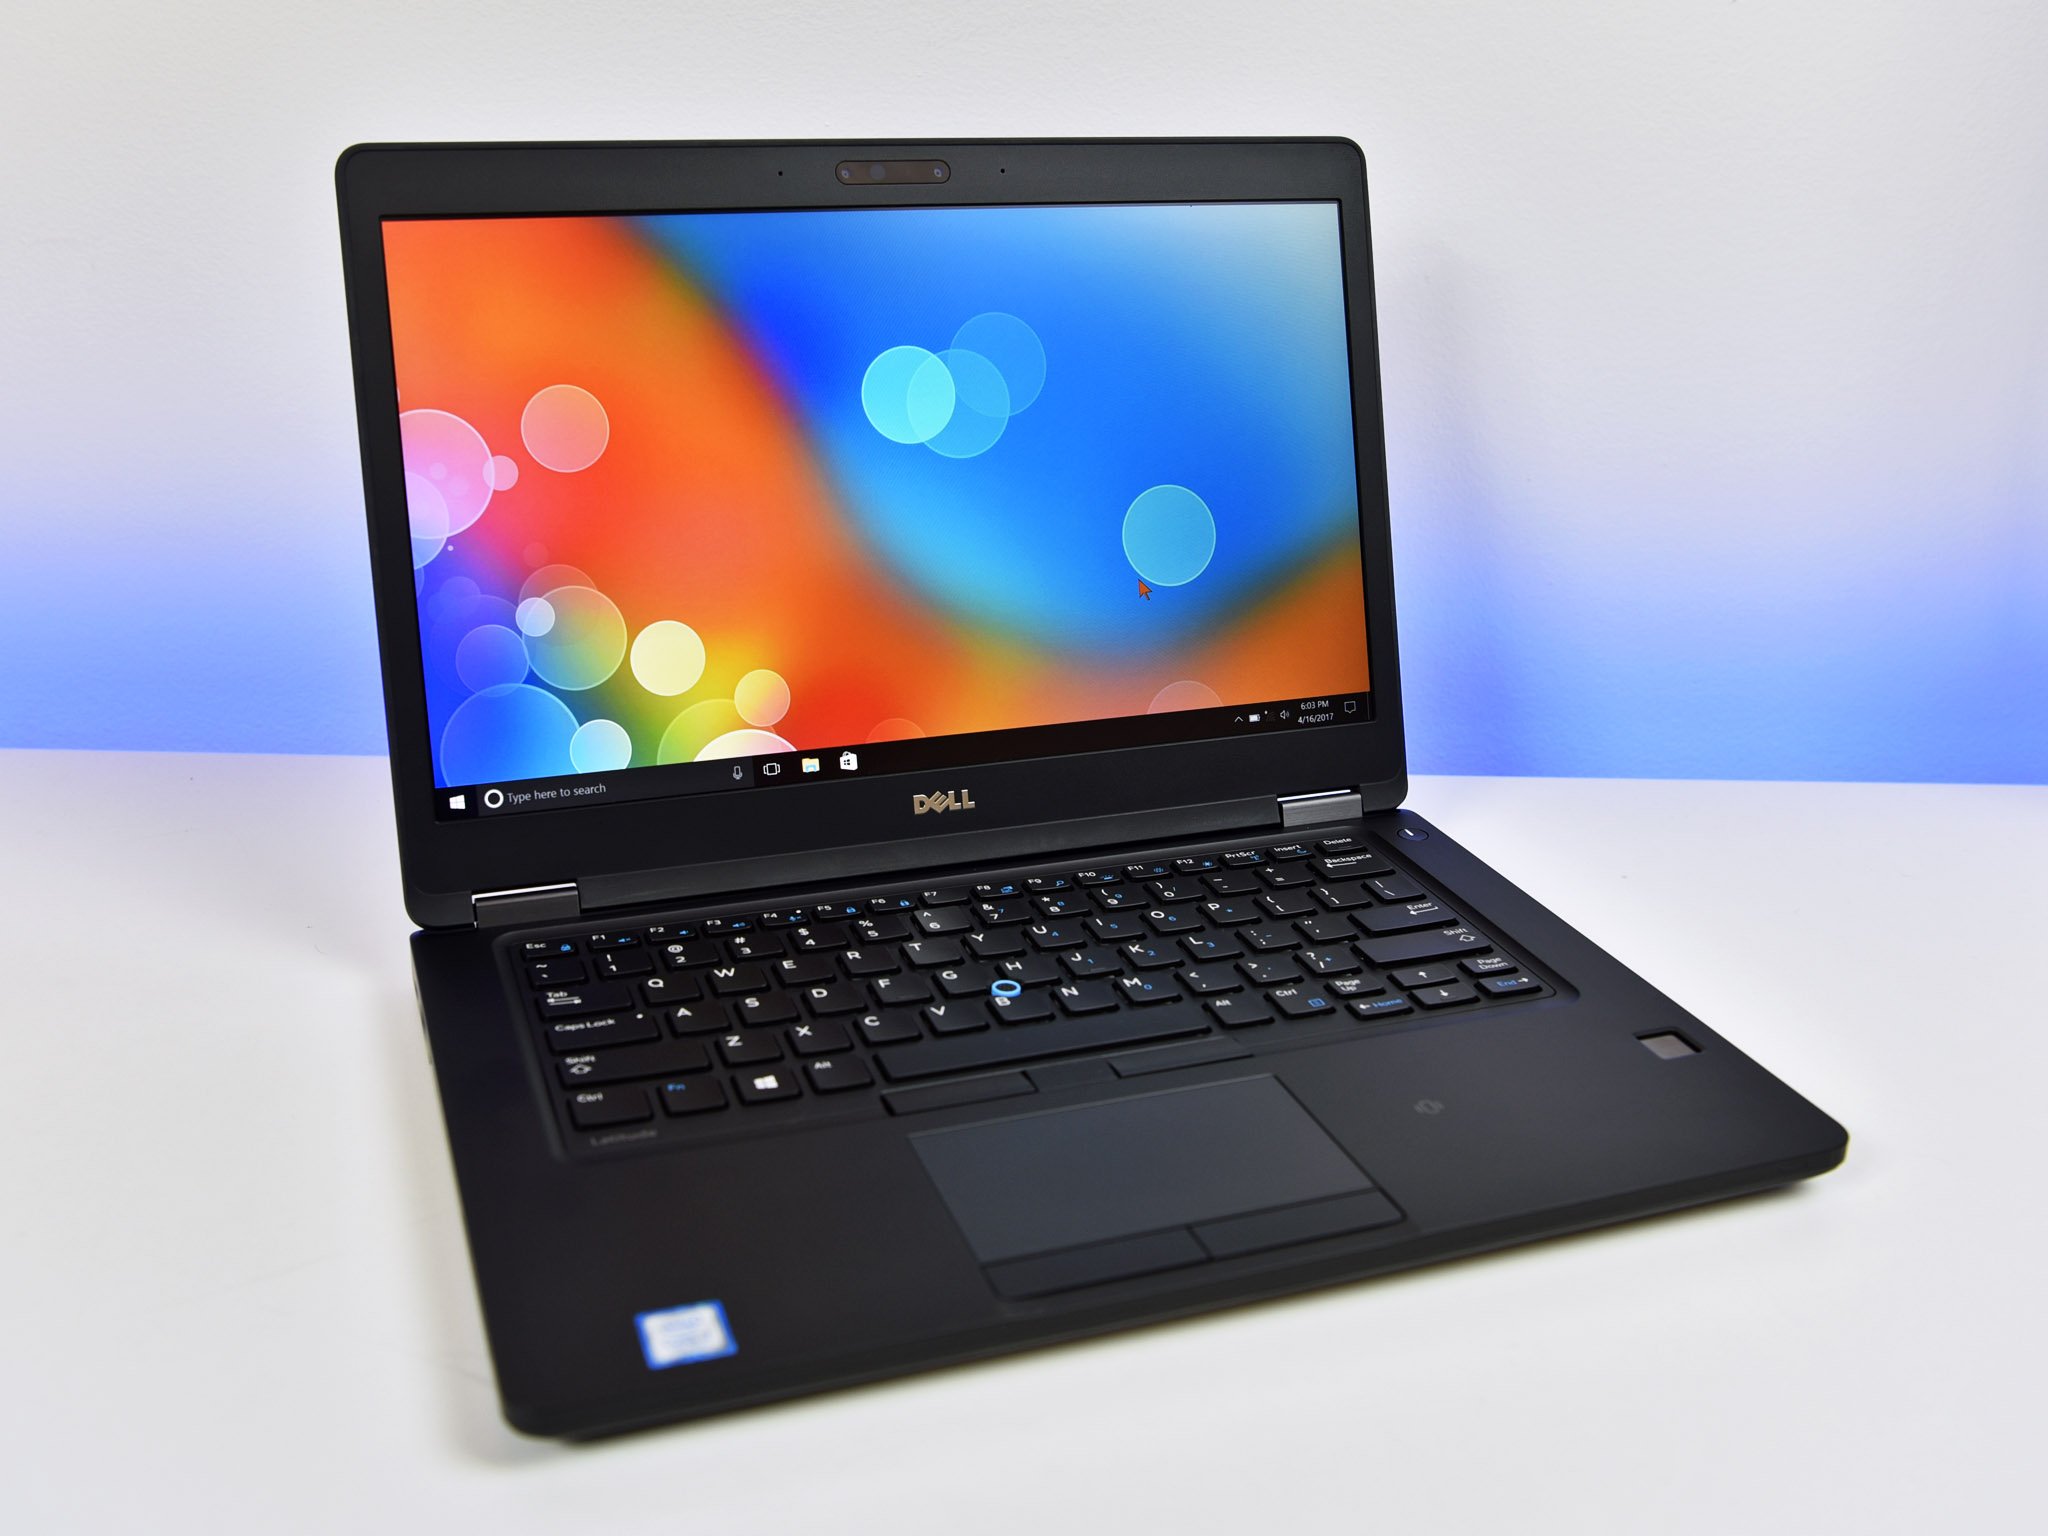 Dell Latitude 5480 review: A beastly business laptop that's built